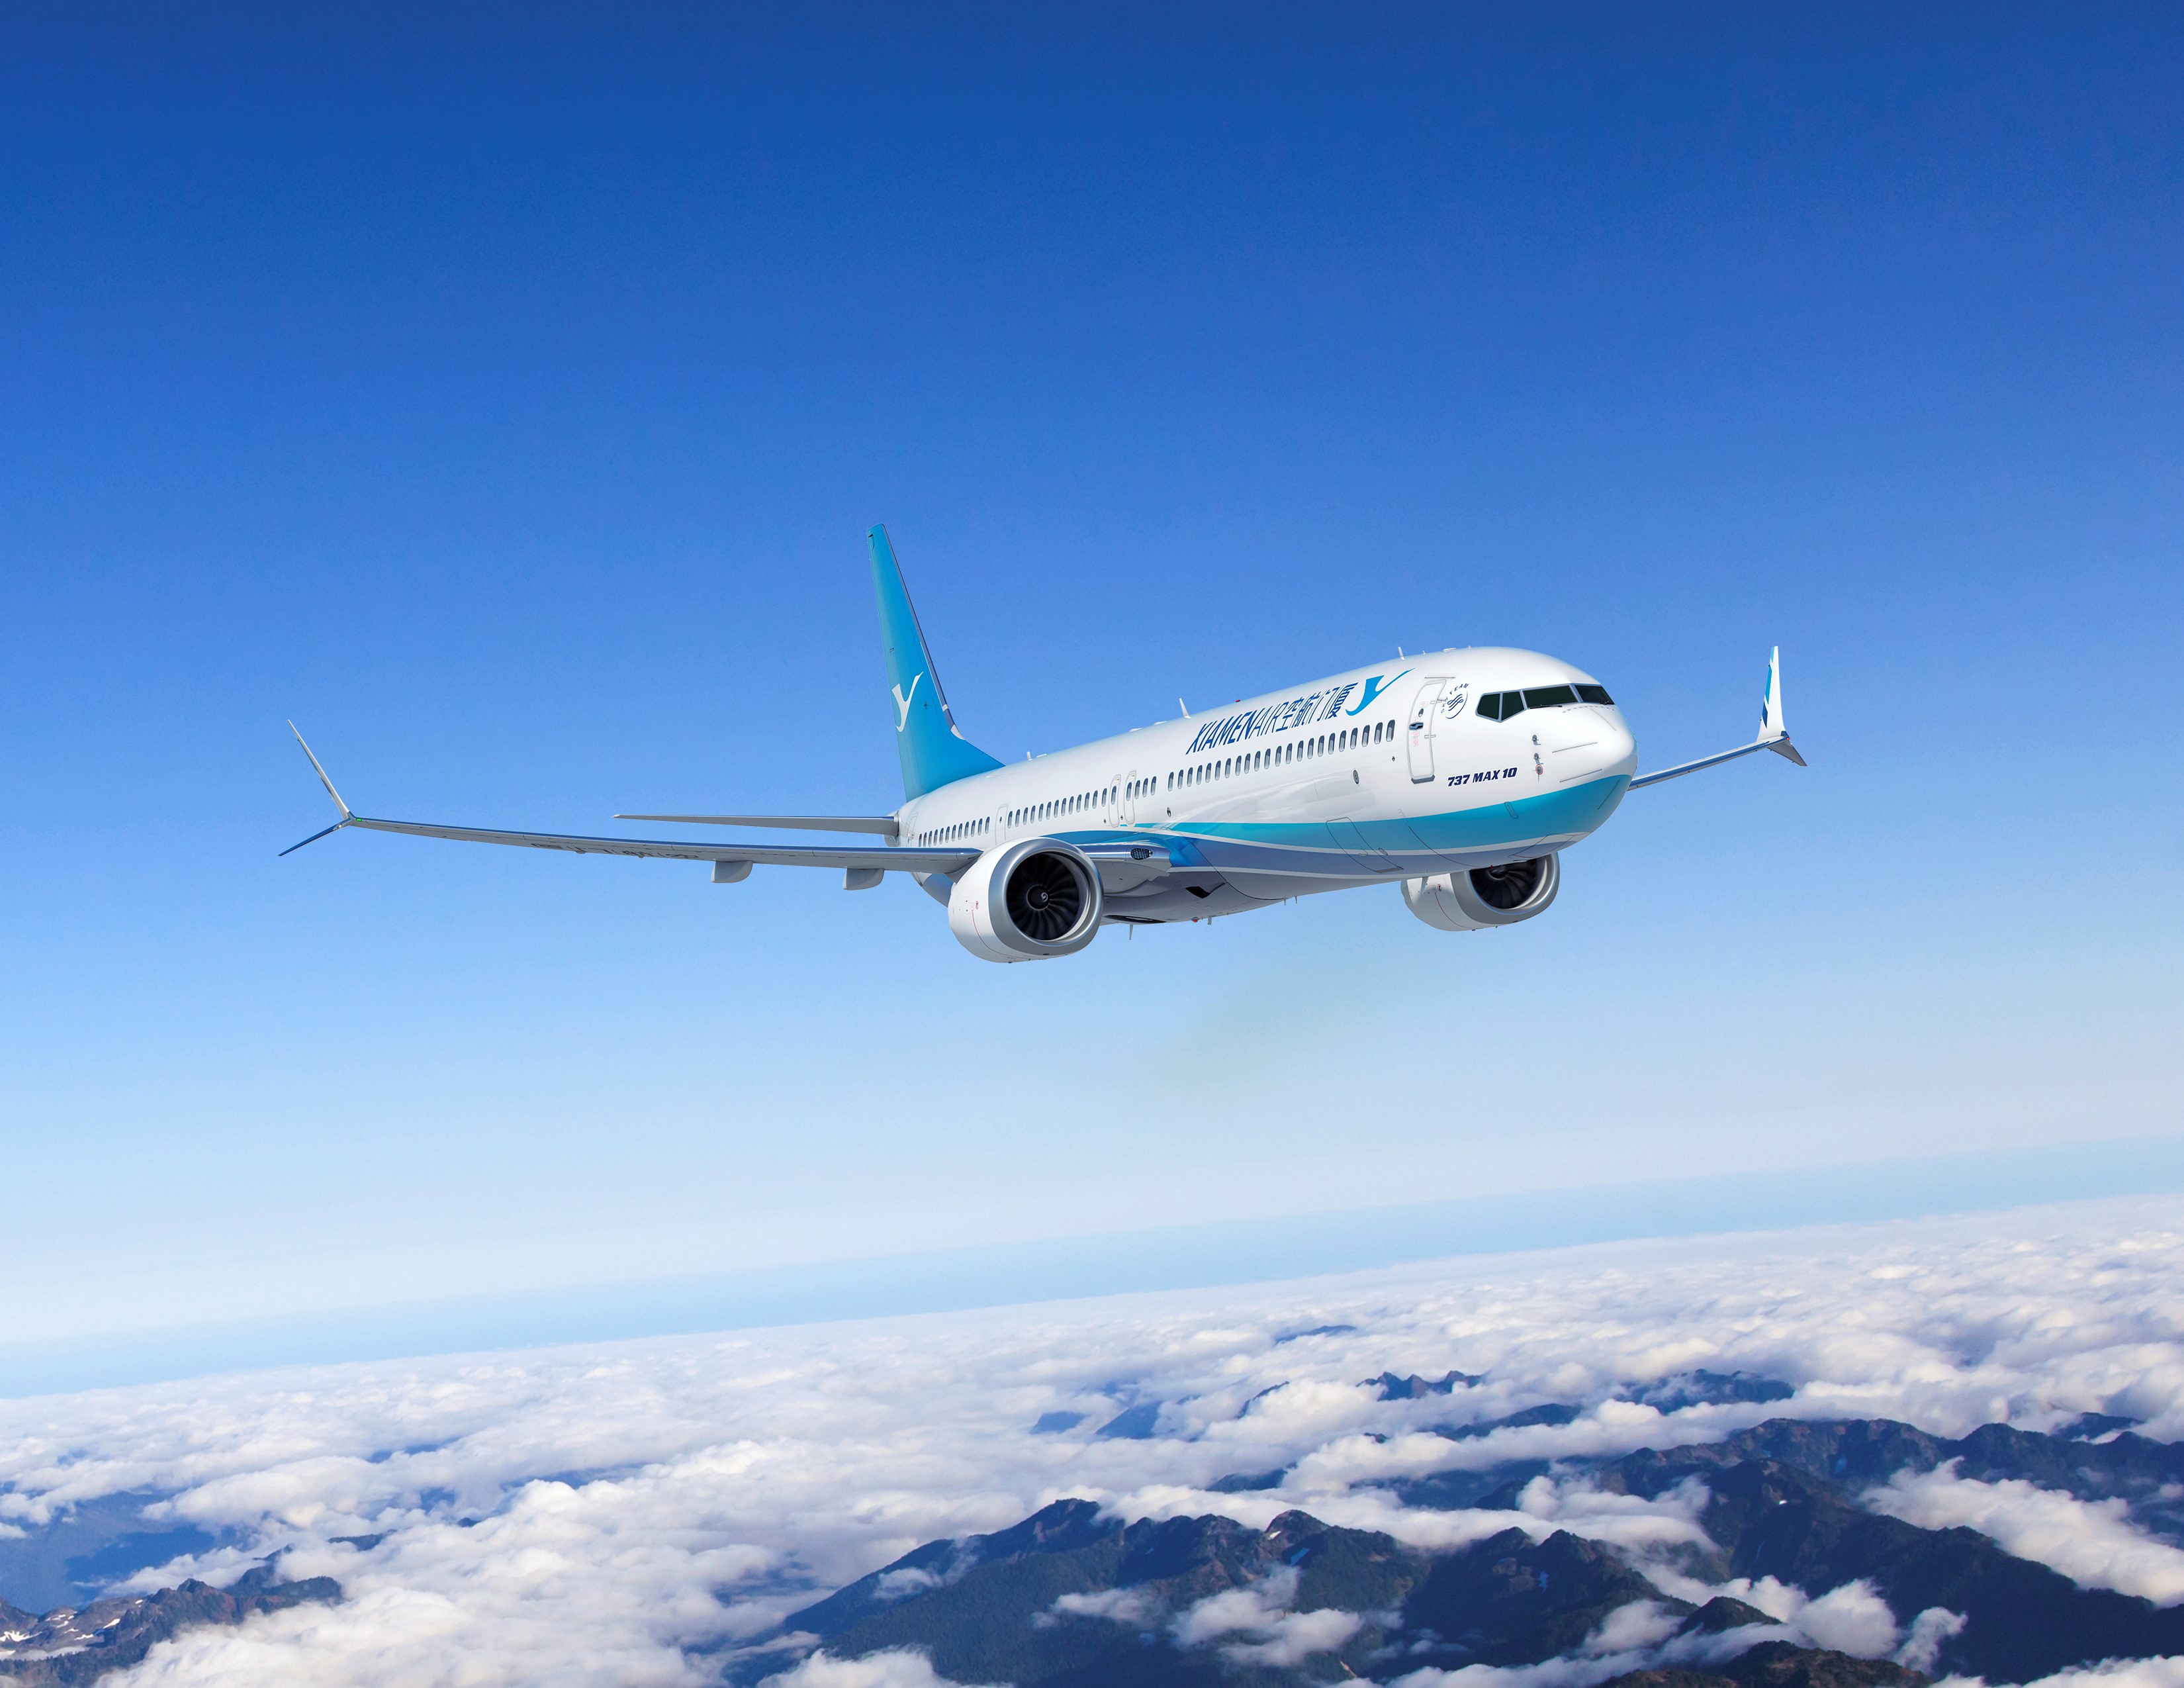 XiamenAir took delivery of its first Boeing 737 MAX in May, and now operates nearly 400 domestic and international routes.